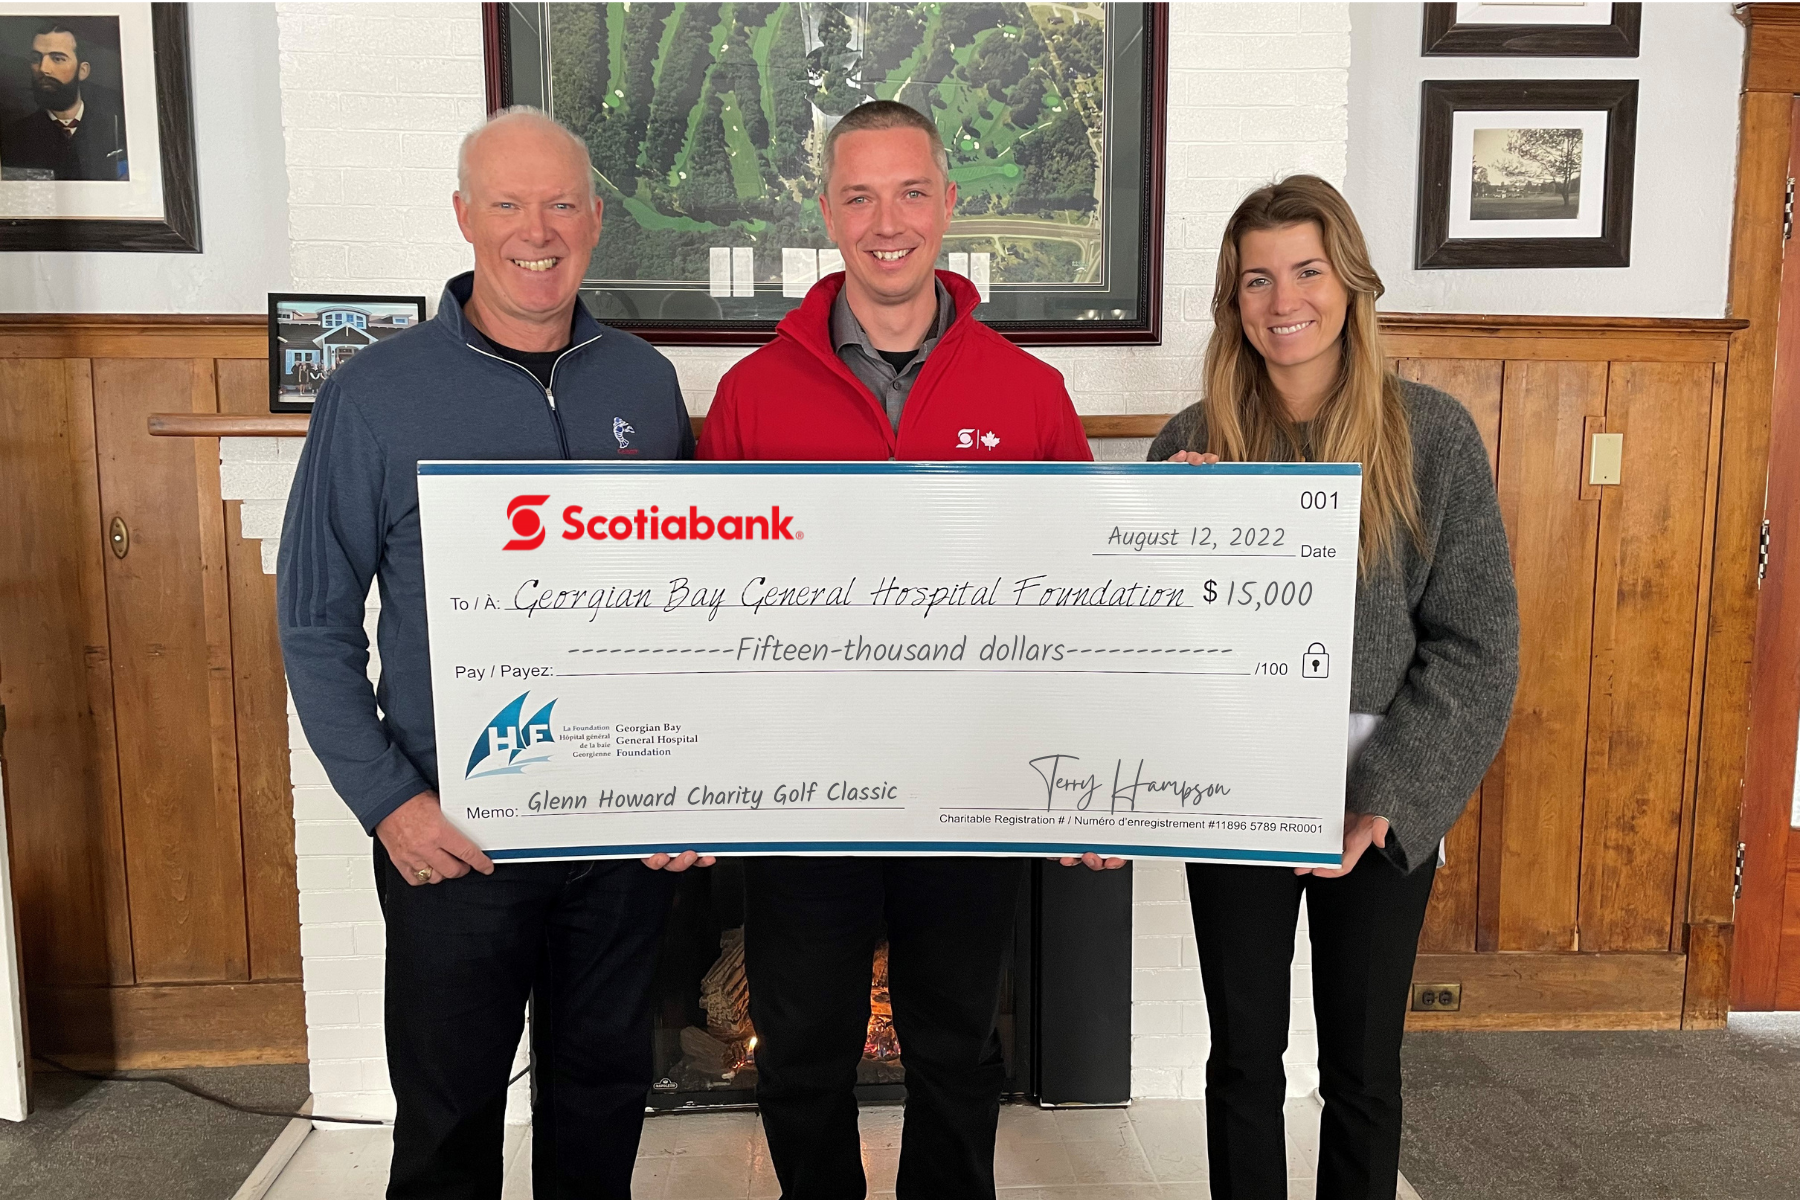 Two men and a women hold a giant cheque made out to GBGH Foundation for the Glenn Howard Charity Golf Classic for $15,000 from Scotiabank